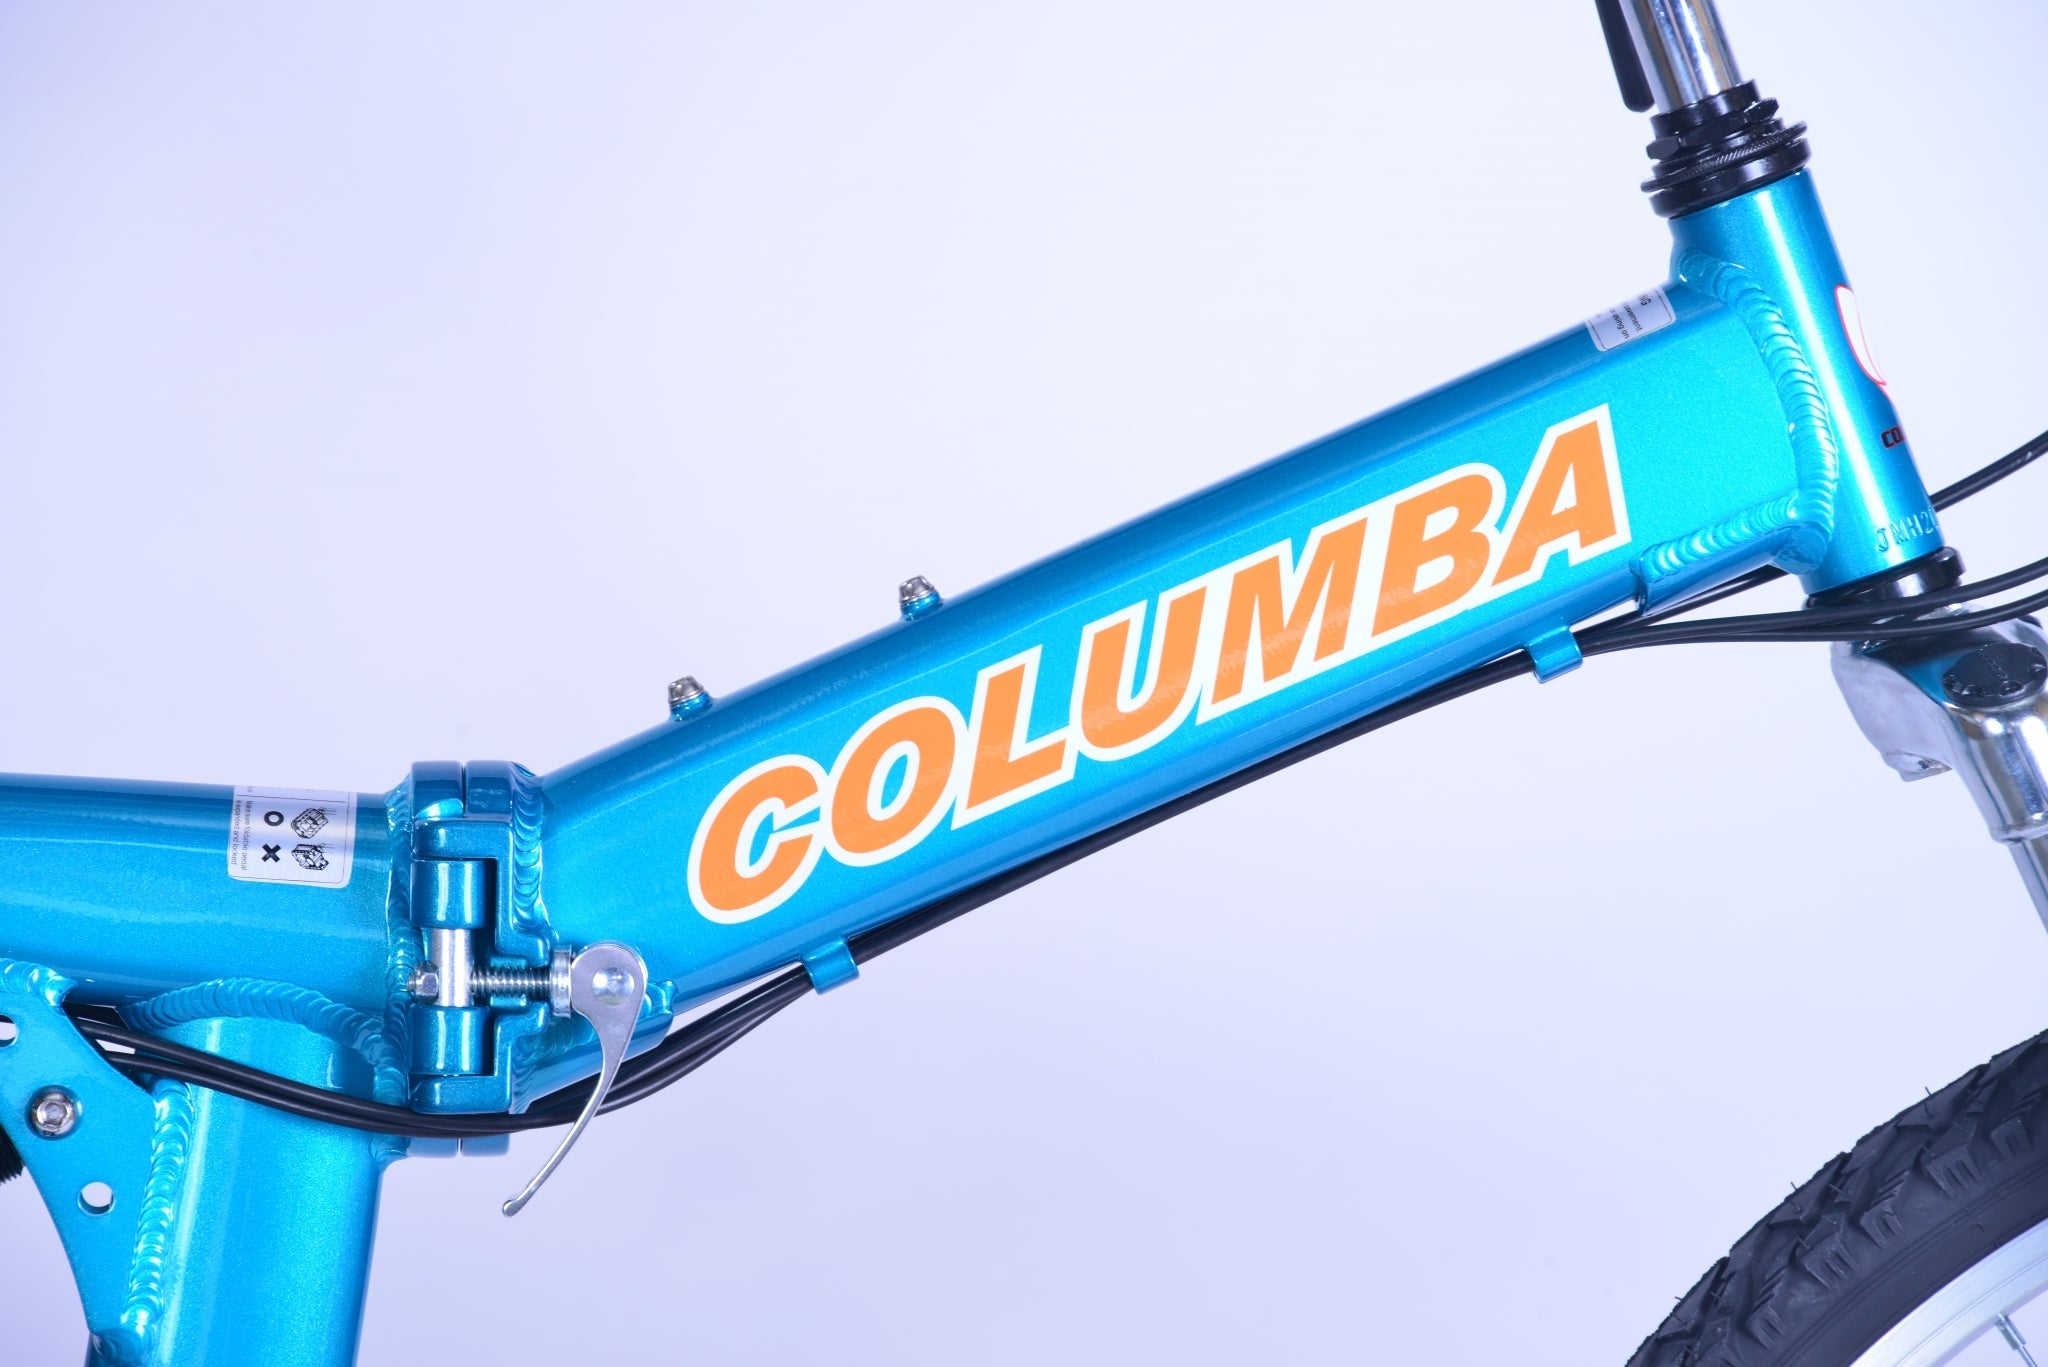 The tube of a blue folding bicycle with a white and orange logo that reads "Columba."